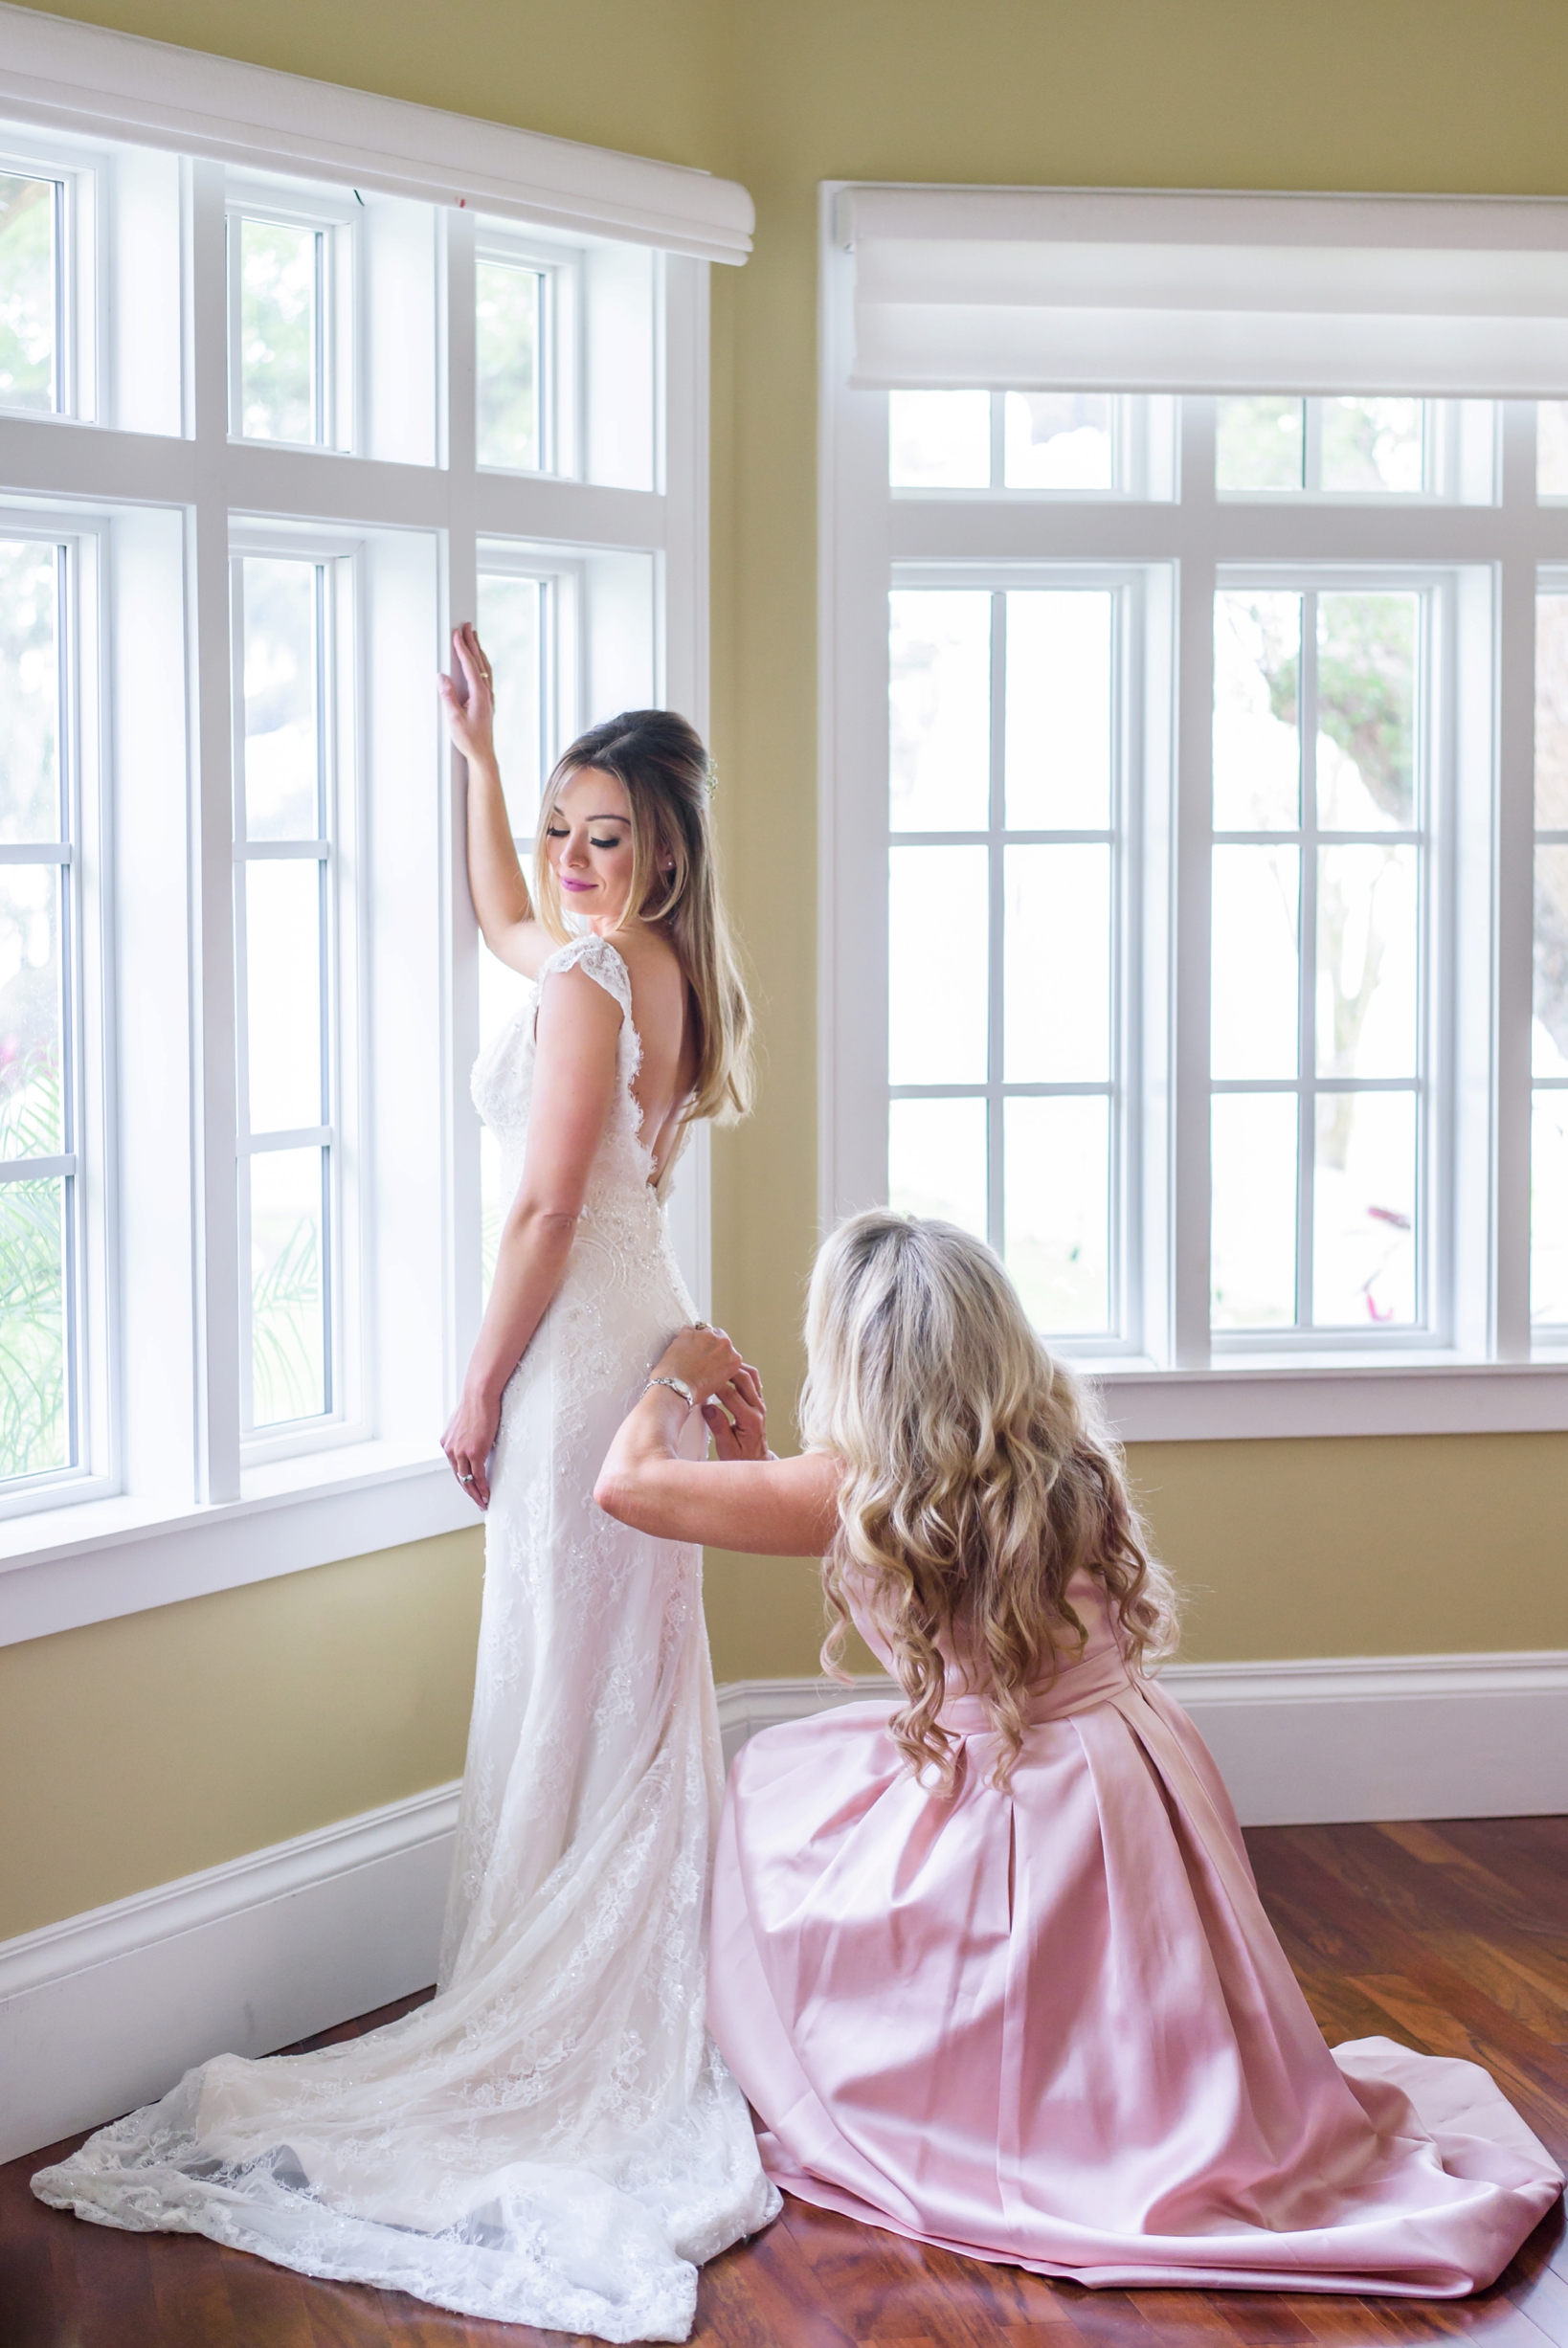 Bride's mother helping her daughter into her dress